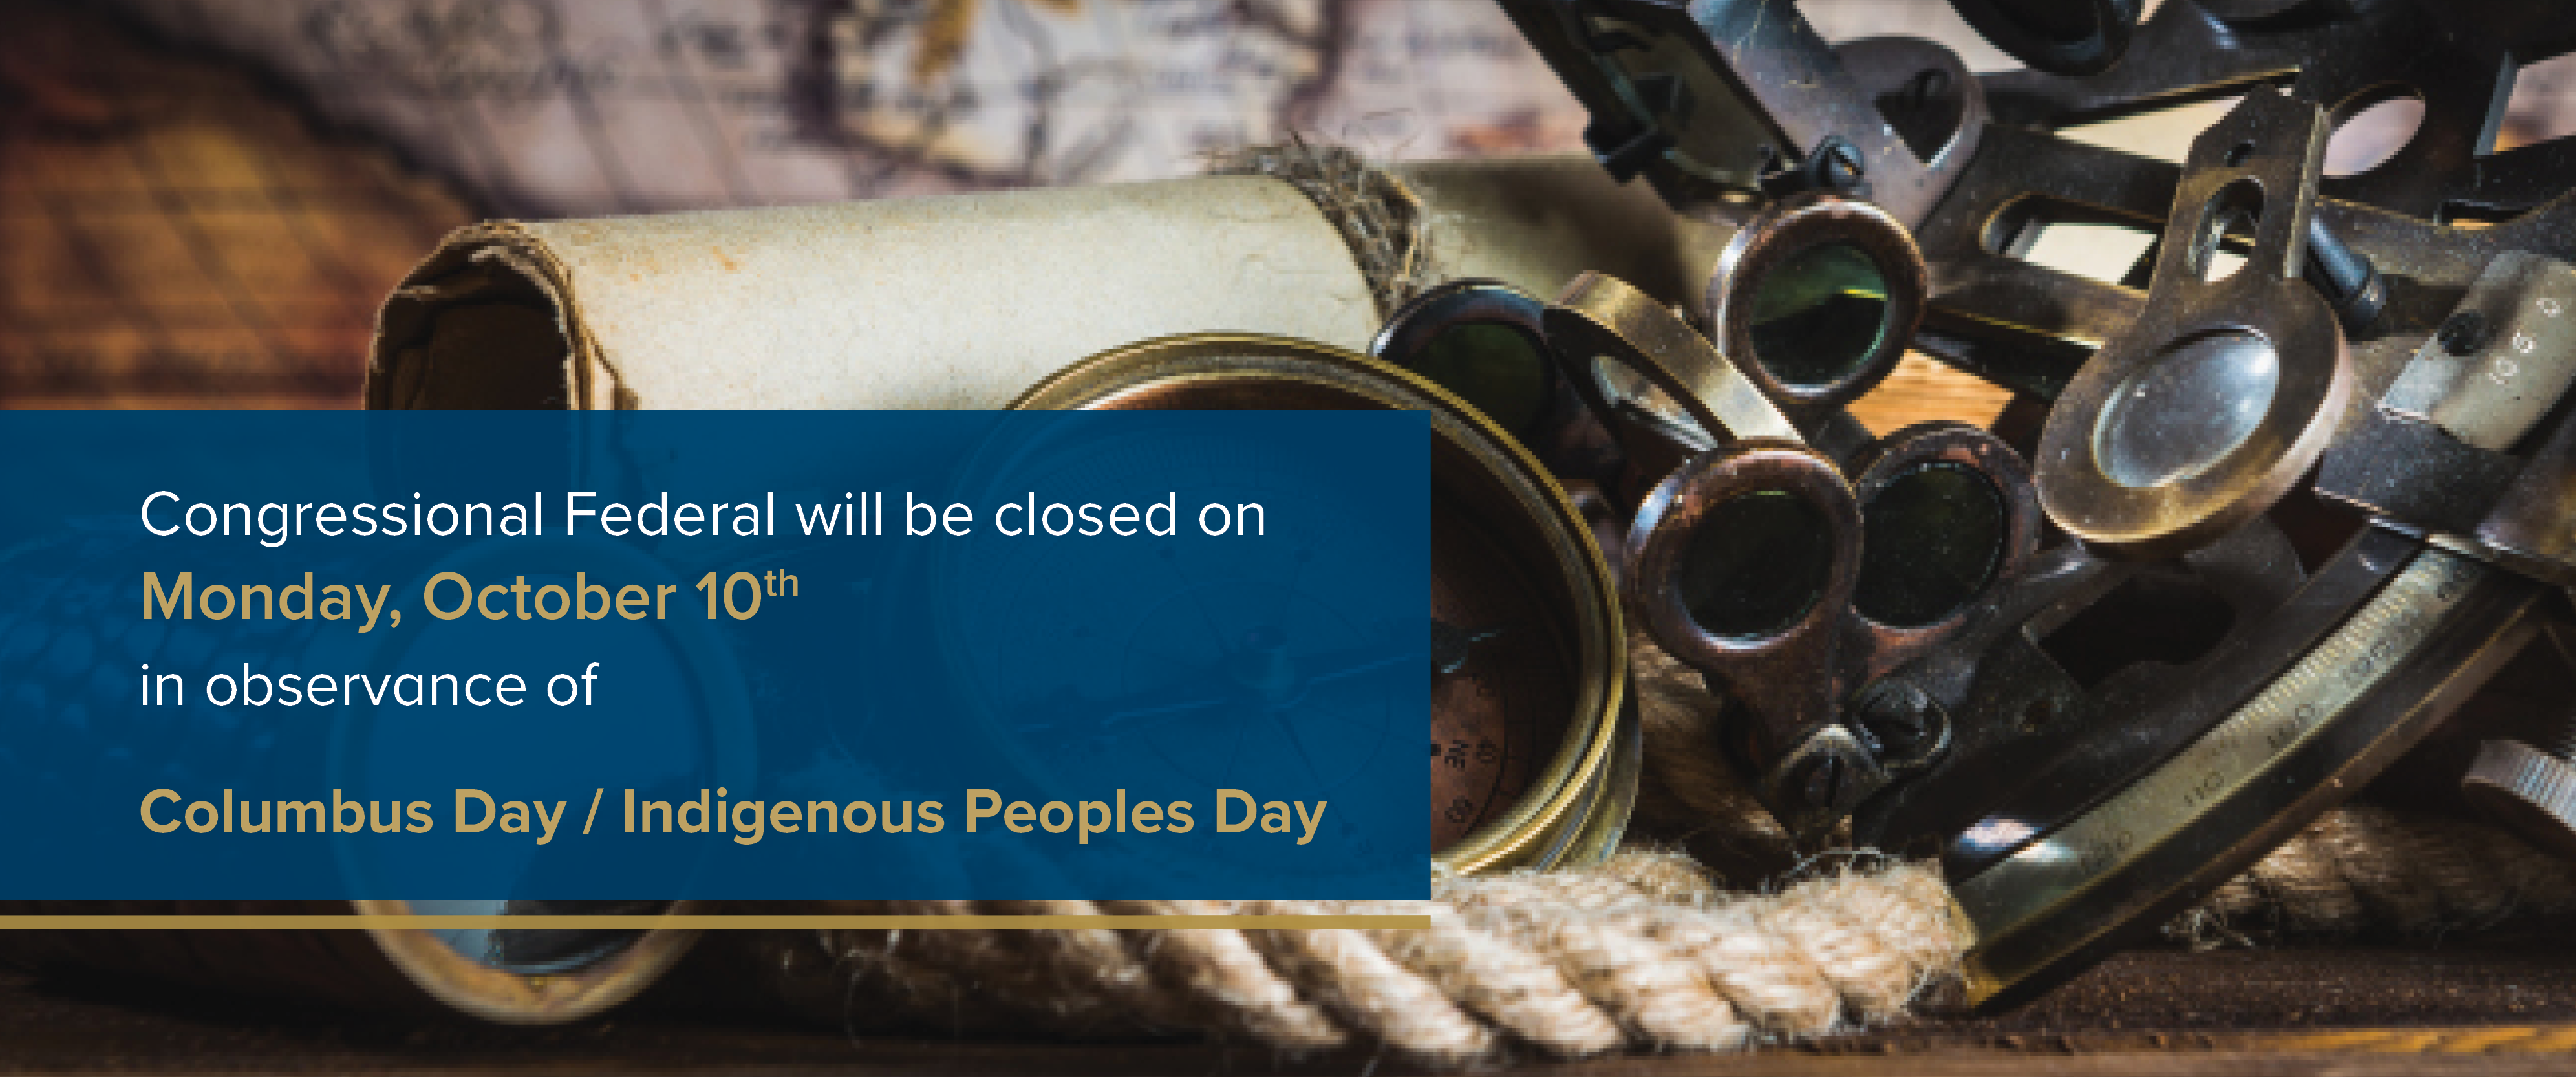 Congressional Federal will be closed on Monday, October 10th in observance of Columbus Day / Indigenous Peoples Day